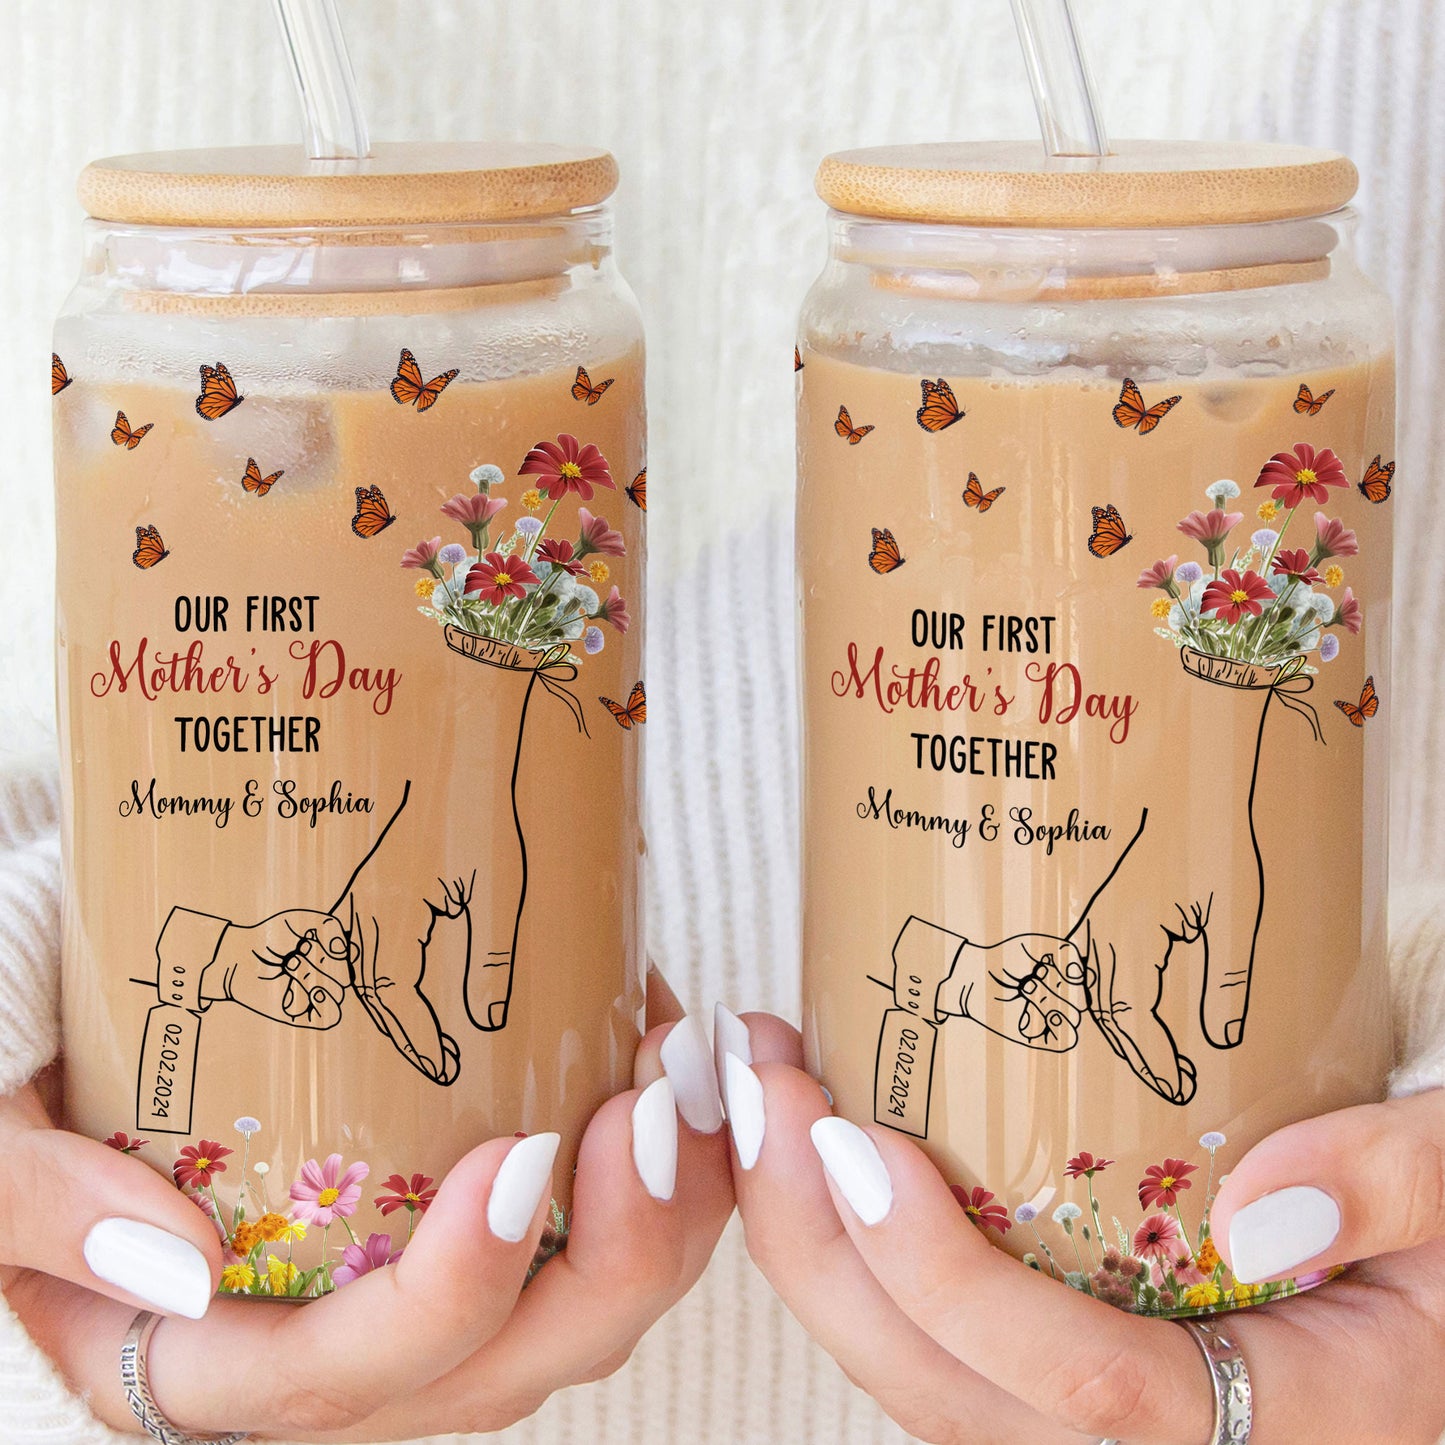 Our First Mother's Day Together - Personalized Glass Cup